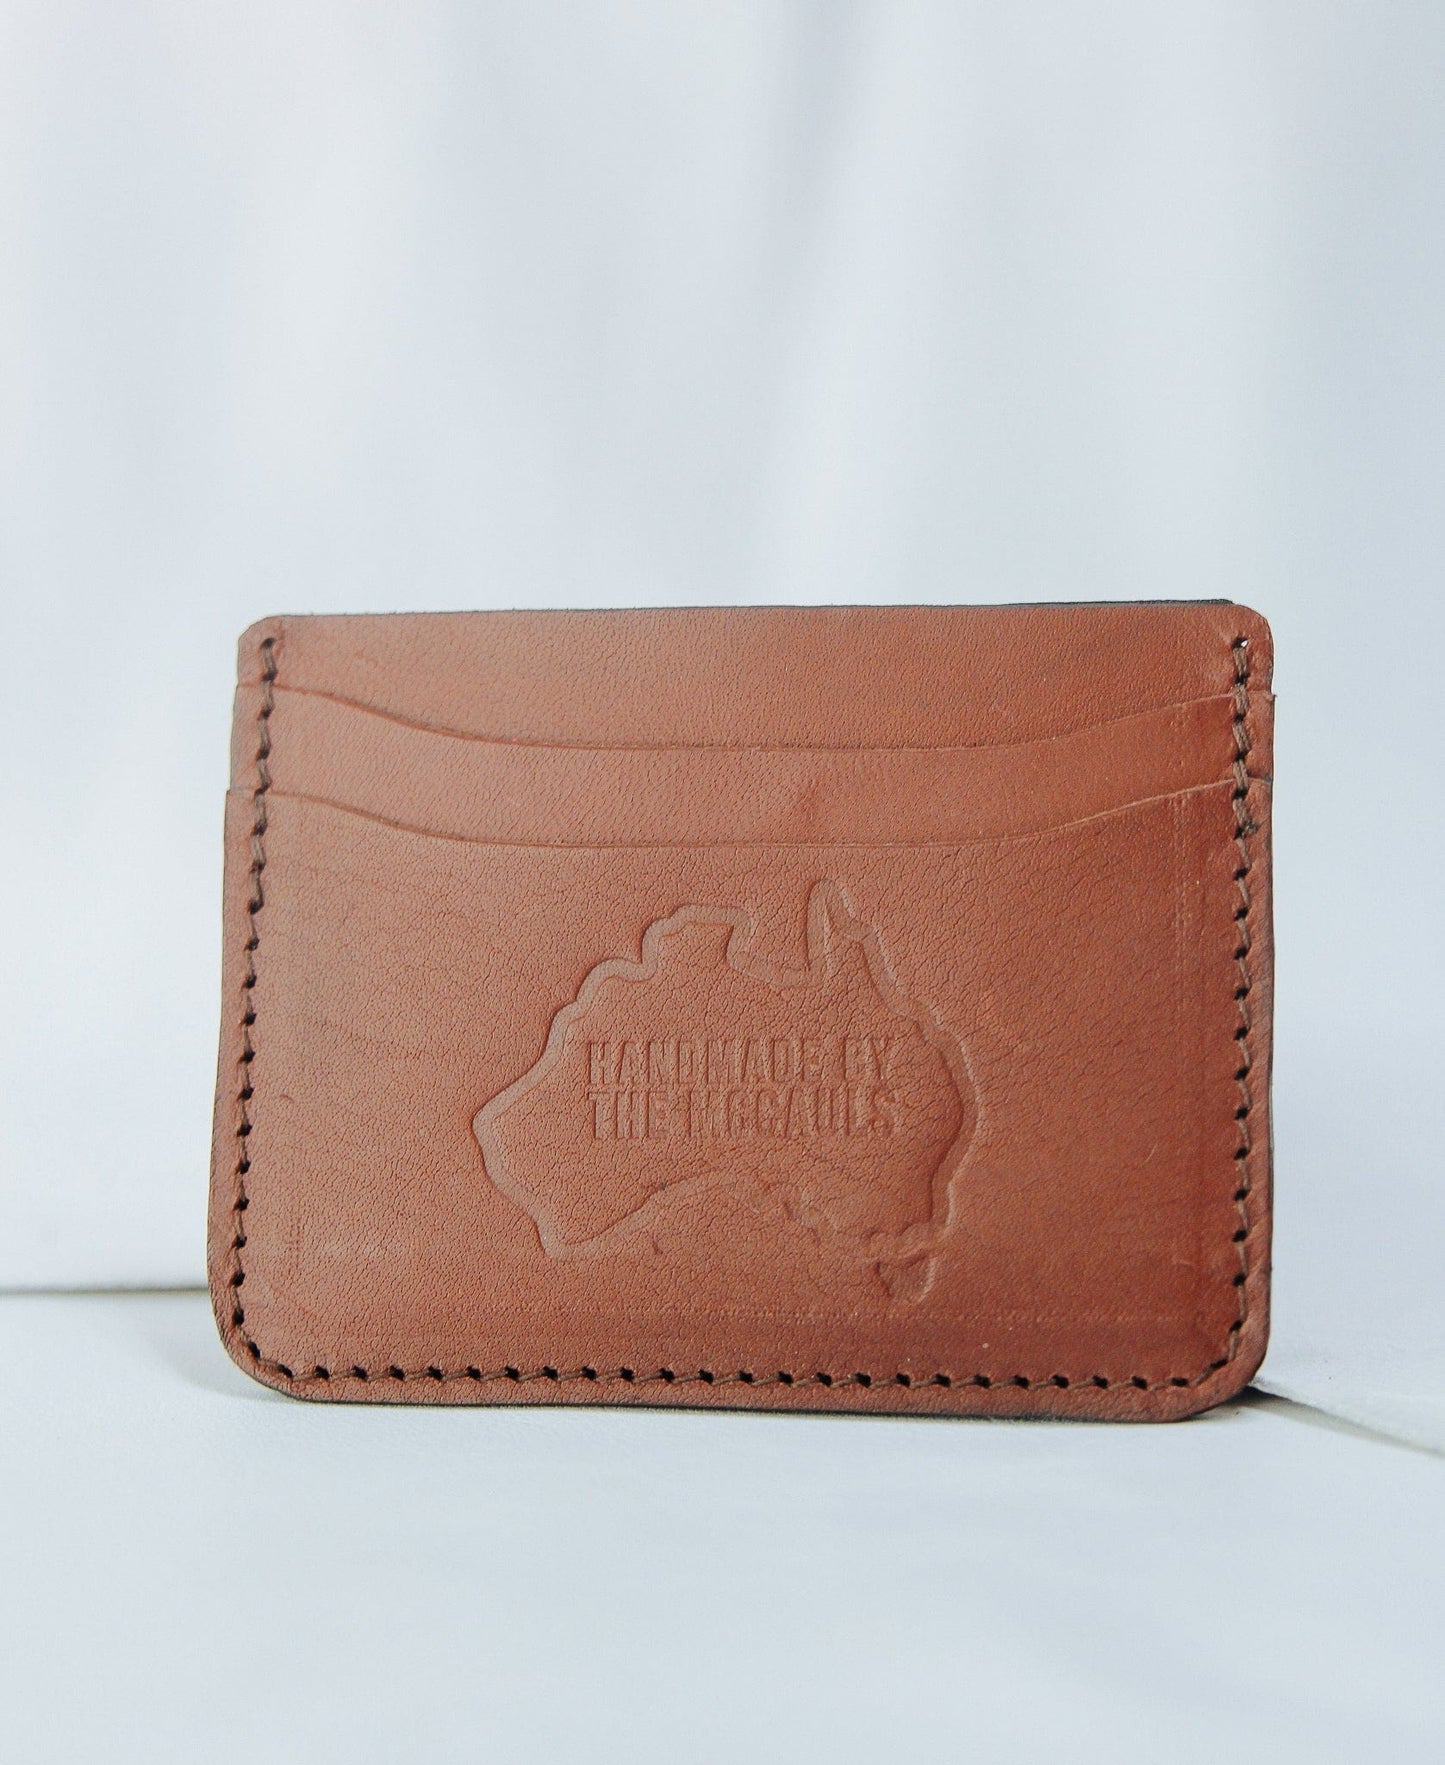 The Real McCaul Wallet Mid Brown Card Holder- 6 Pocket Australian Made Australian Owned Card Holder Kangaroo Leather Wallet- 6 Pocket Made In Australia